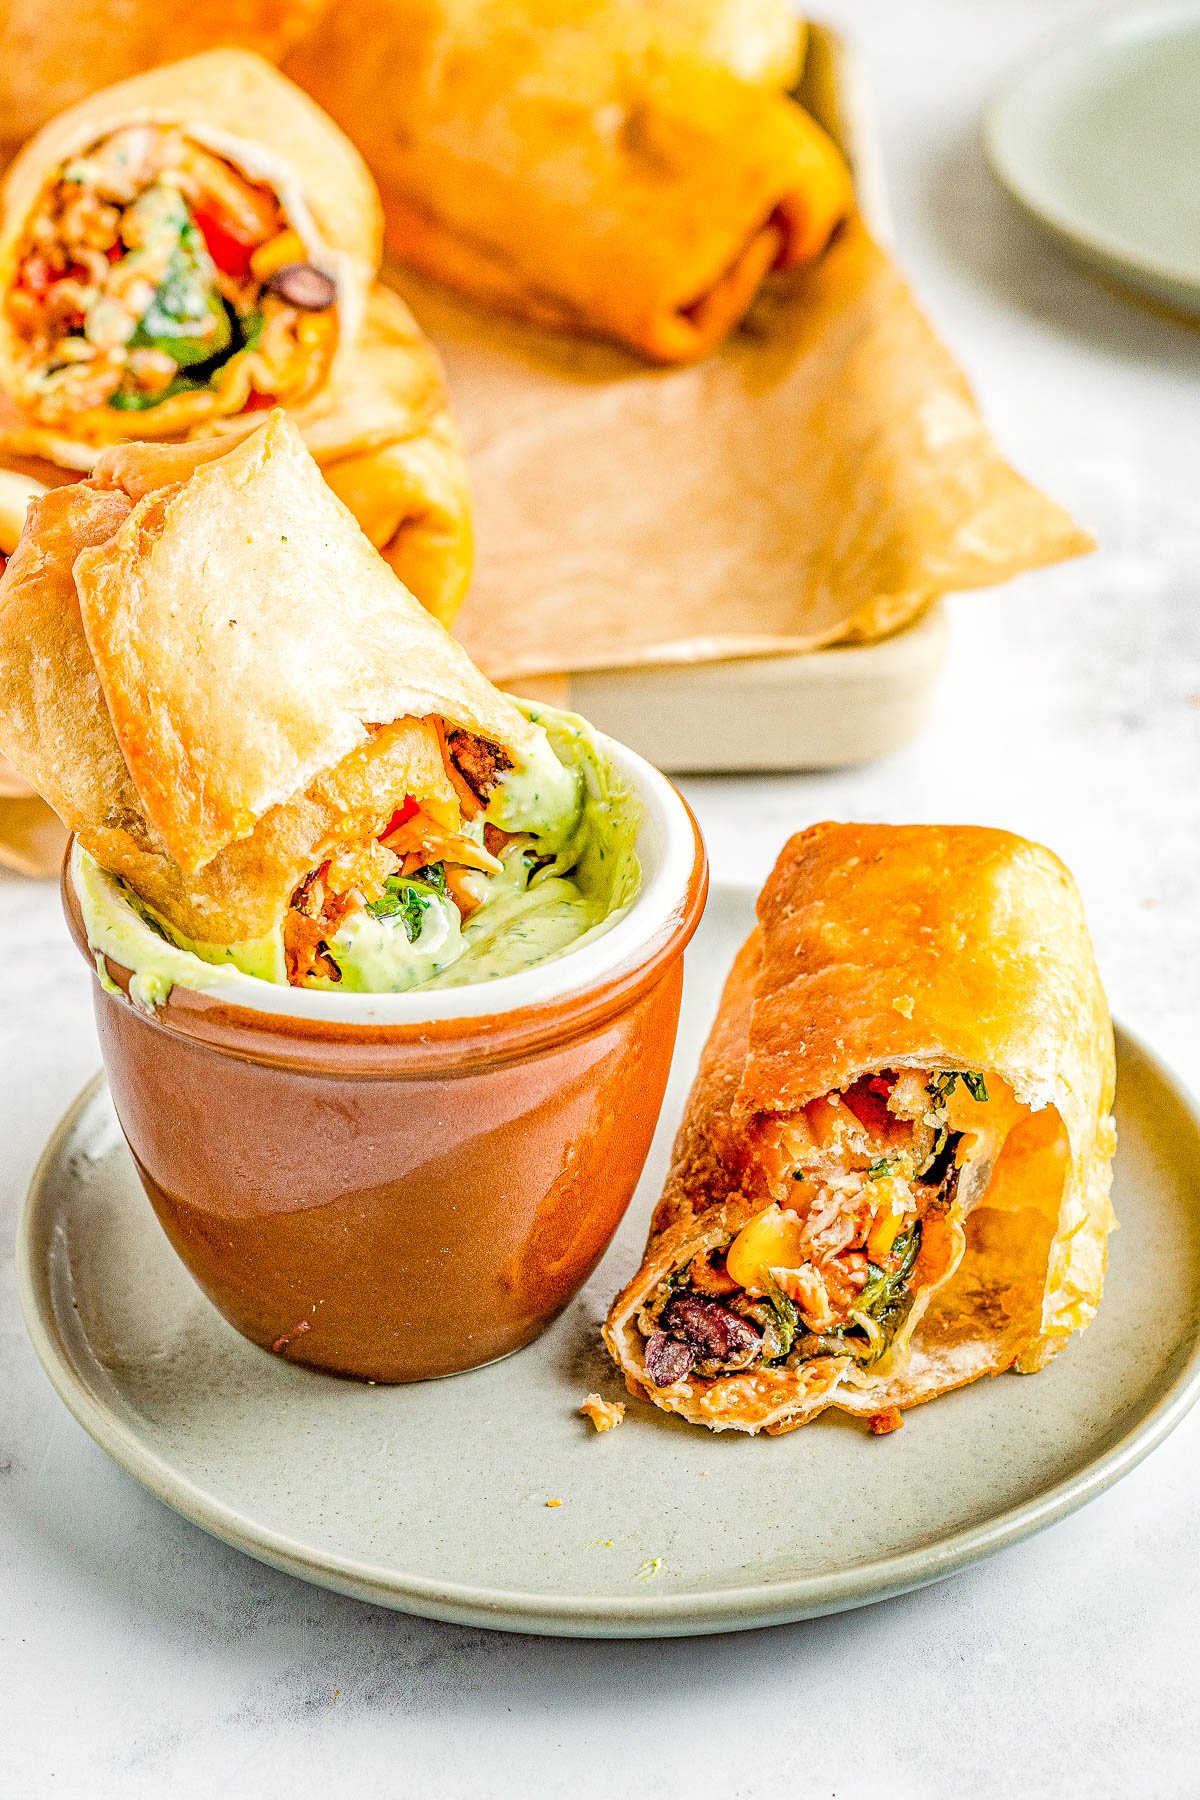 Southwestern Egg Rolls - Juicy chicken, melted Pepper Jack cheese, black beans, bell peppers, and corn seasoned with southwest-inspired seasonings and fried to crispy PERFECTION! You can fry, air fry, or bake these EASY egg rolls which are a Chili's Restaurant copycat. The quick creamy mashed avocado ranch dipping sauce is the perfect final touch! 